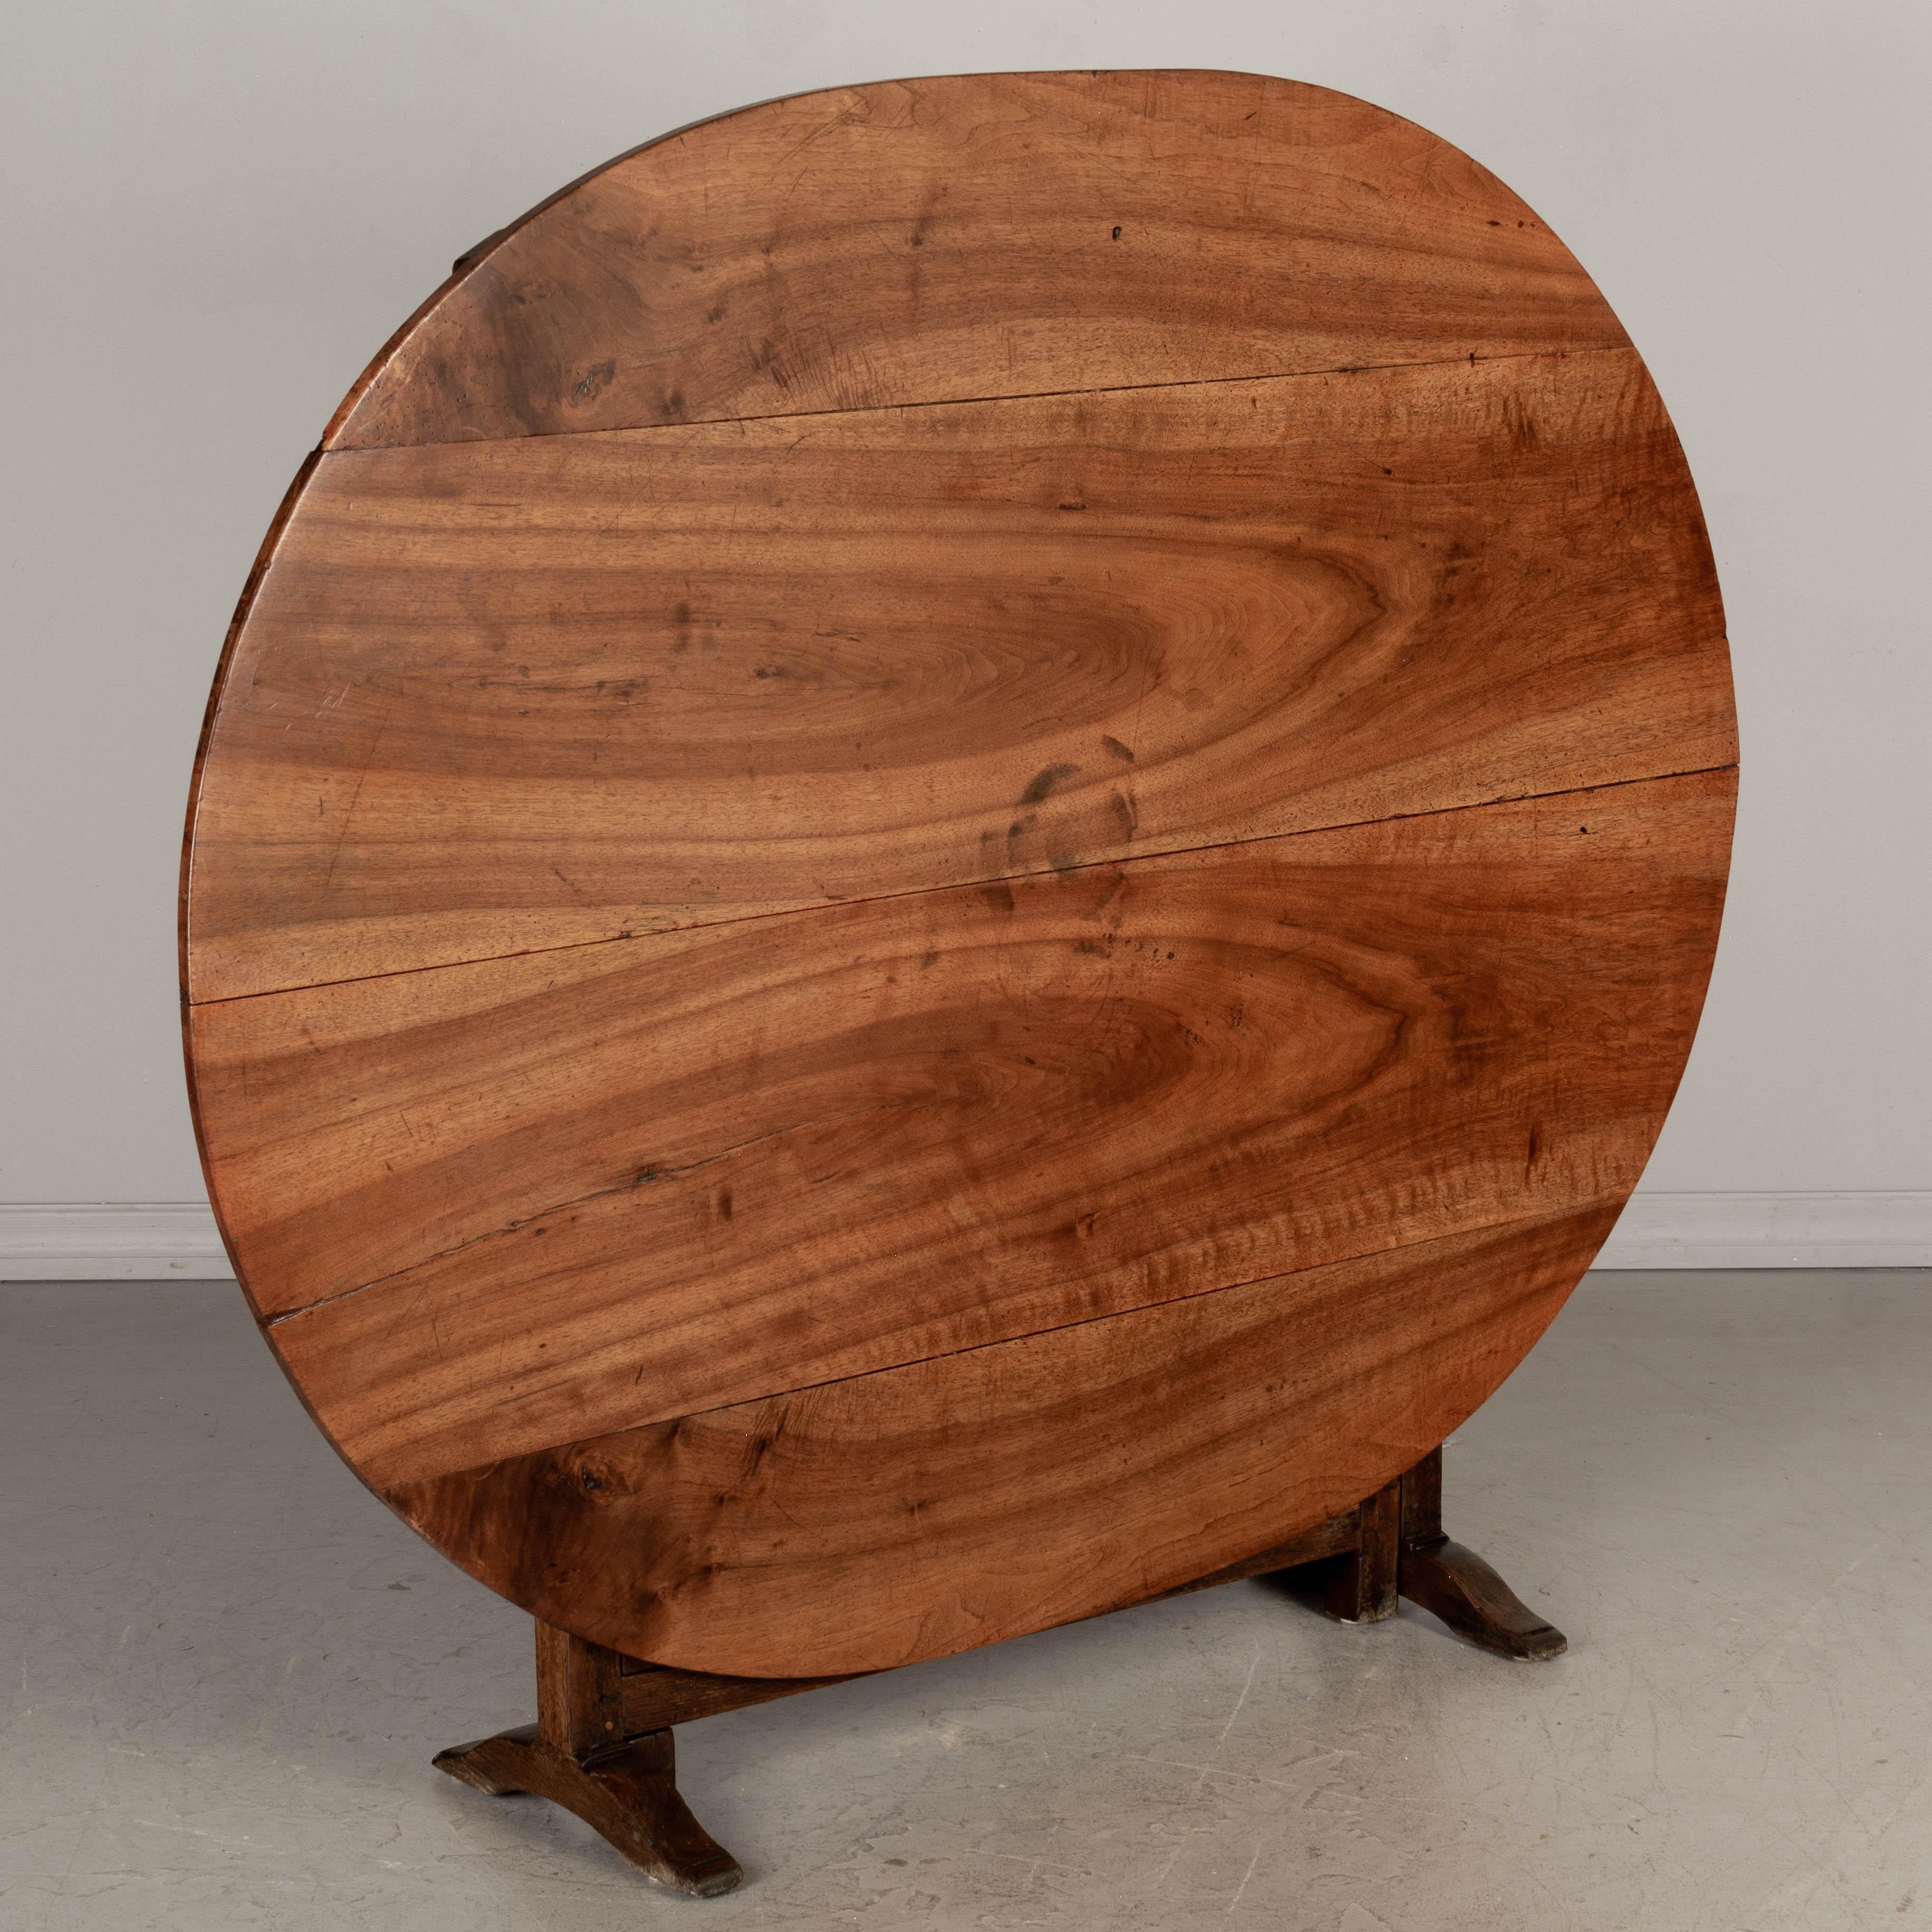 A 19th century French oval wine tasting, or tilt-top table from Burgundy. The top is made from four planks of solid walnut, book-matched. Beautiful grain and character to the wood. The base is made of oak and is thick and sturdy. Well-crafted with